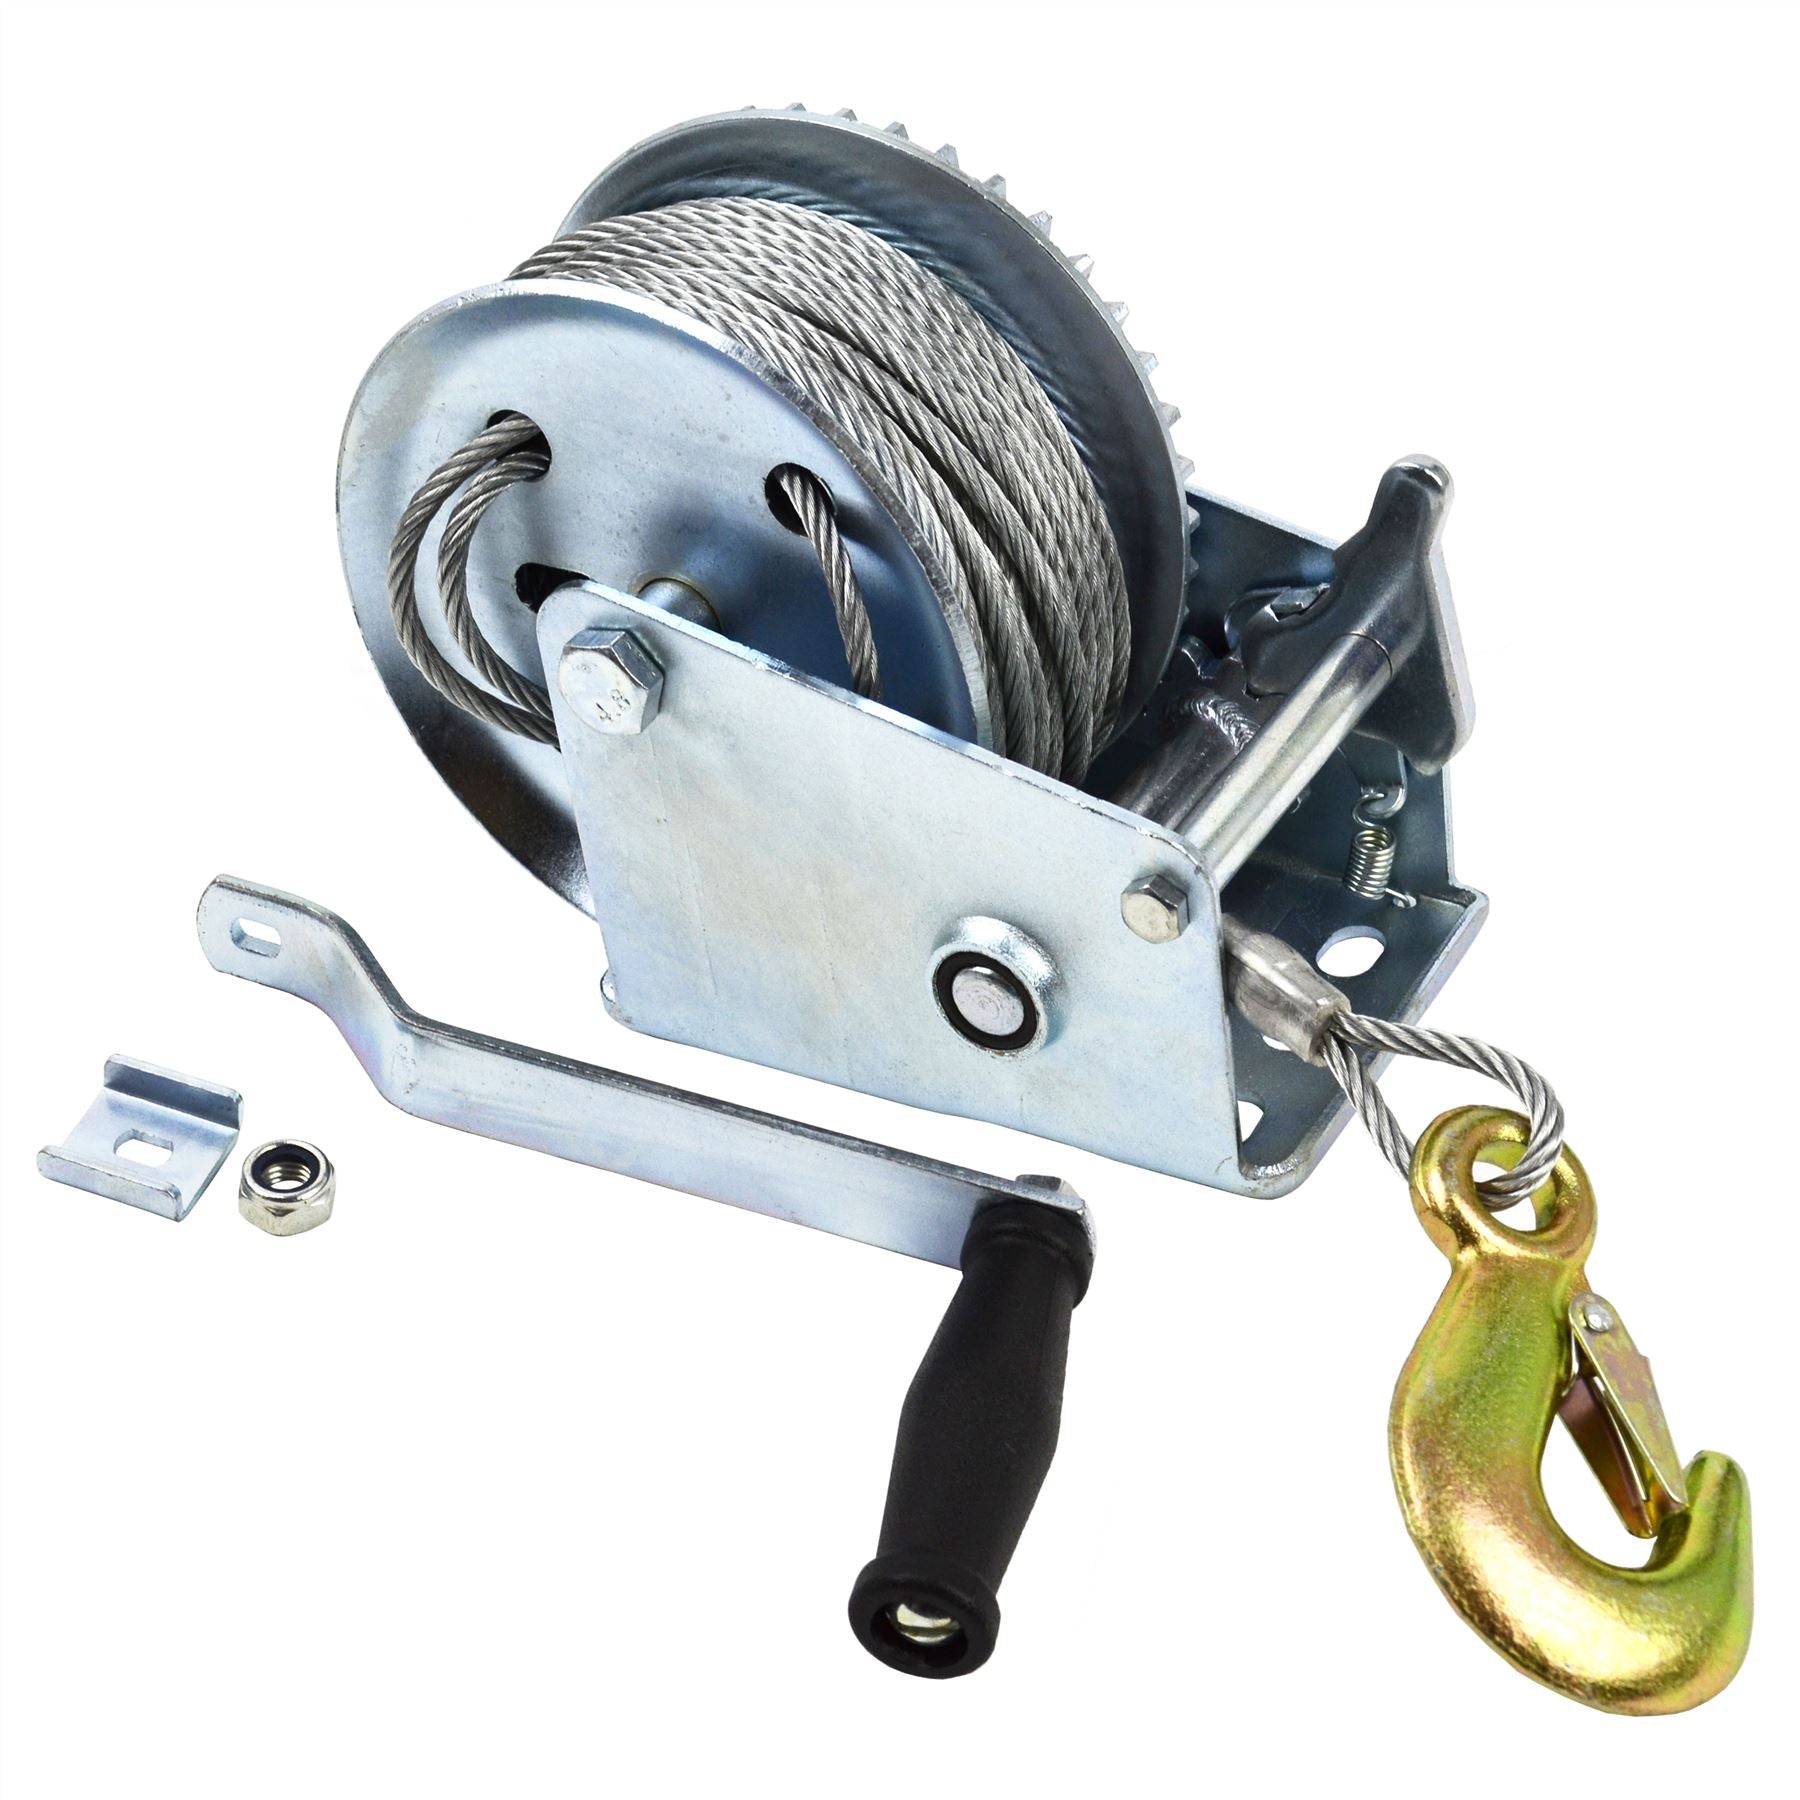 Hand Winch for Boat/Car Trailer 1200lb Complete with 20m Cable TE141